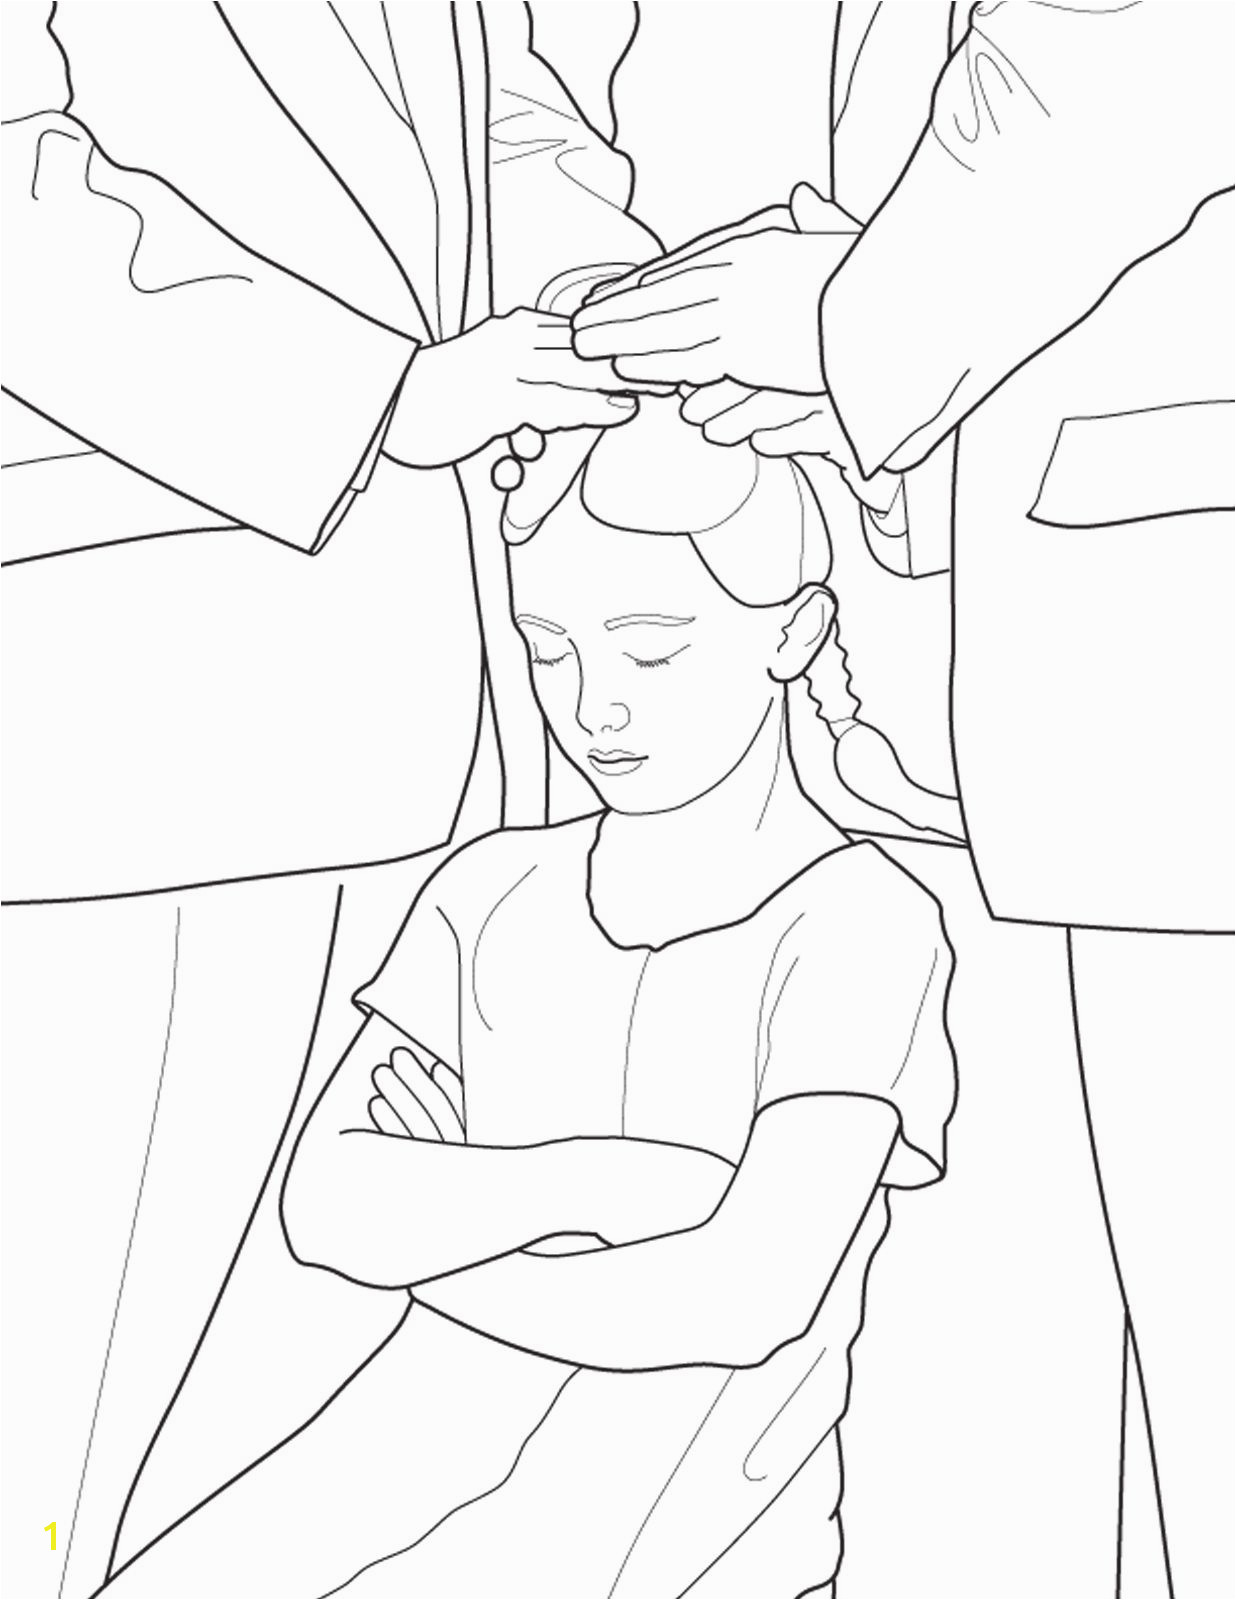 A Primary coloring page from the LDS Church A girl is confirmed following baptism